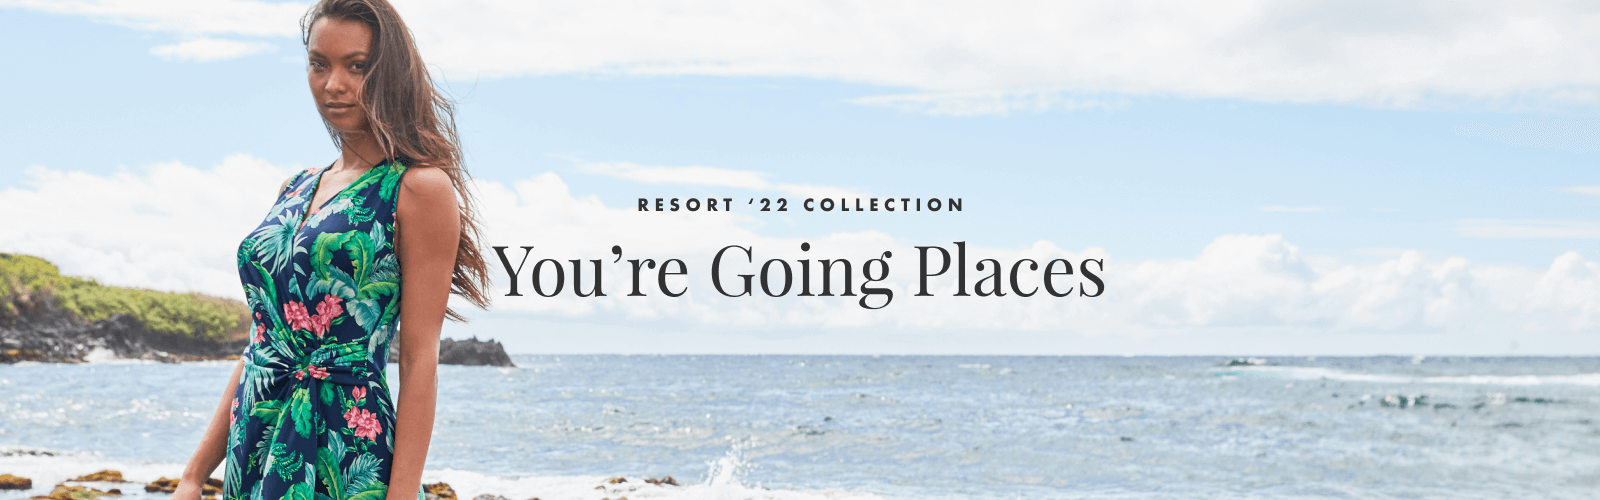 Resort '22 Collection: You're Going Places